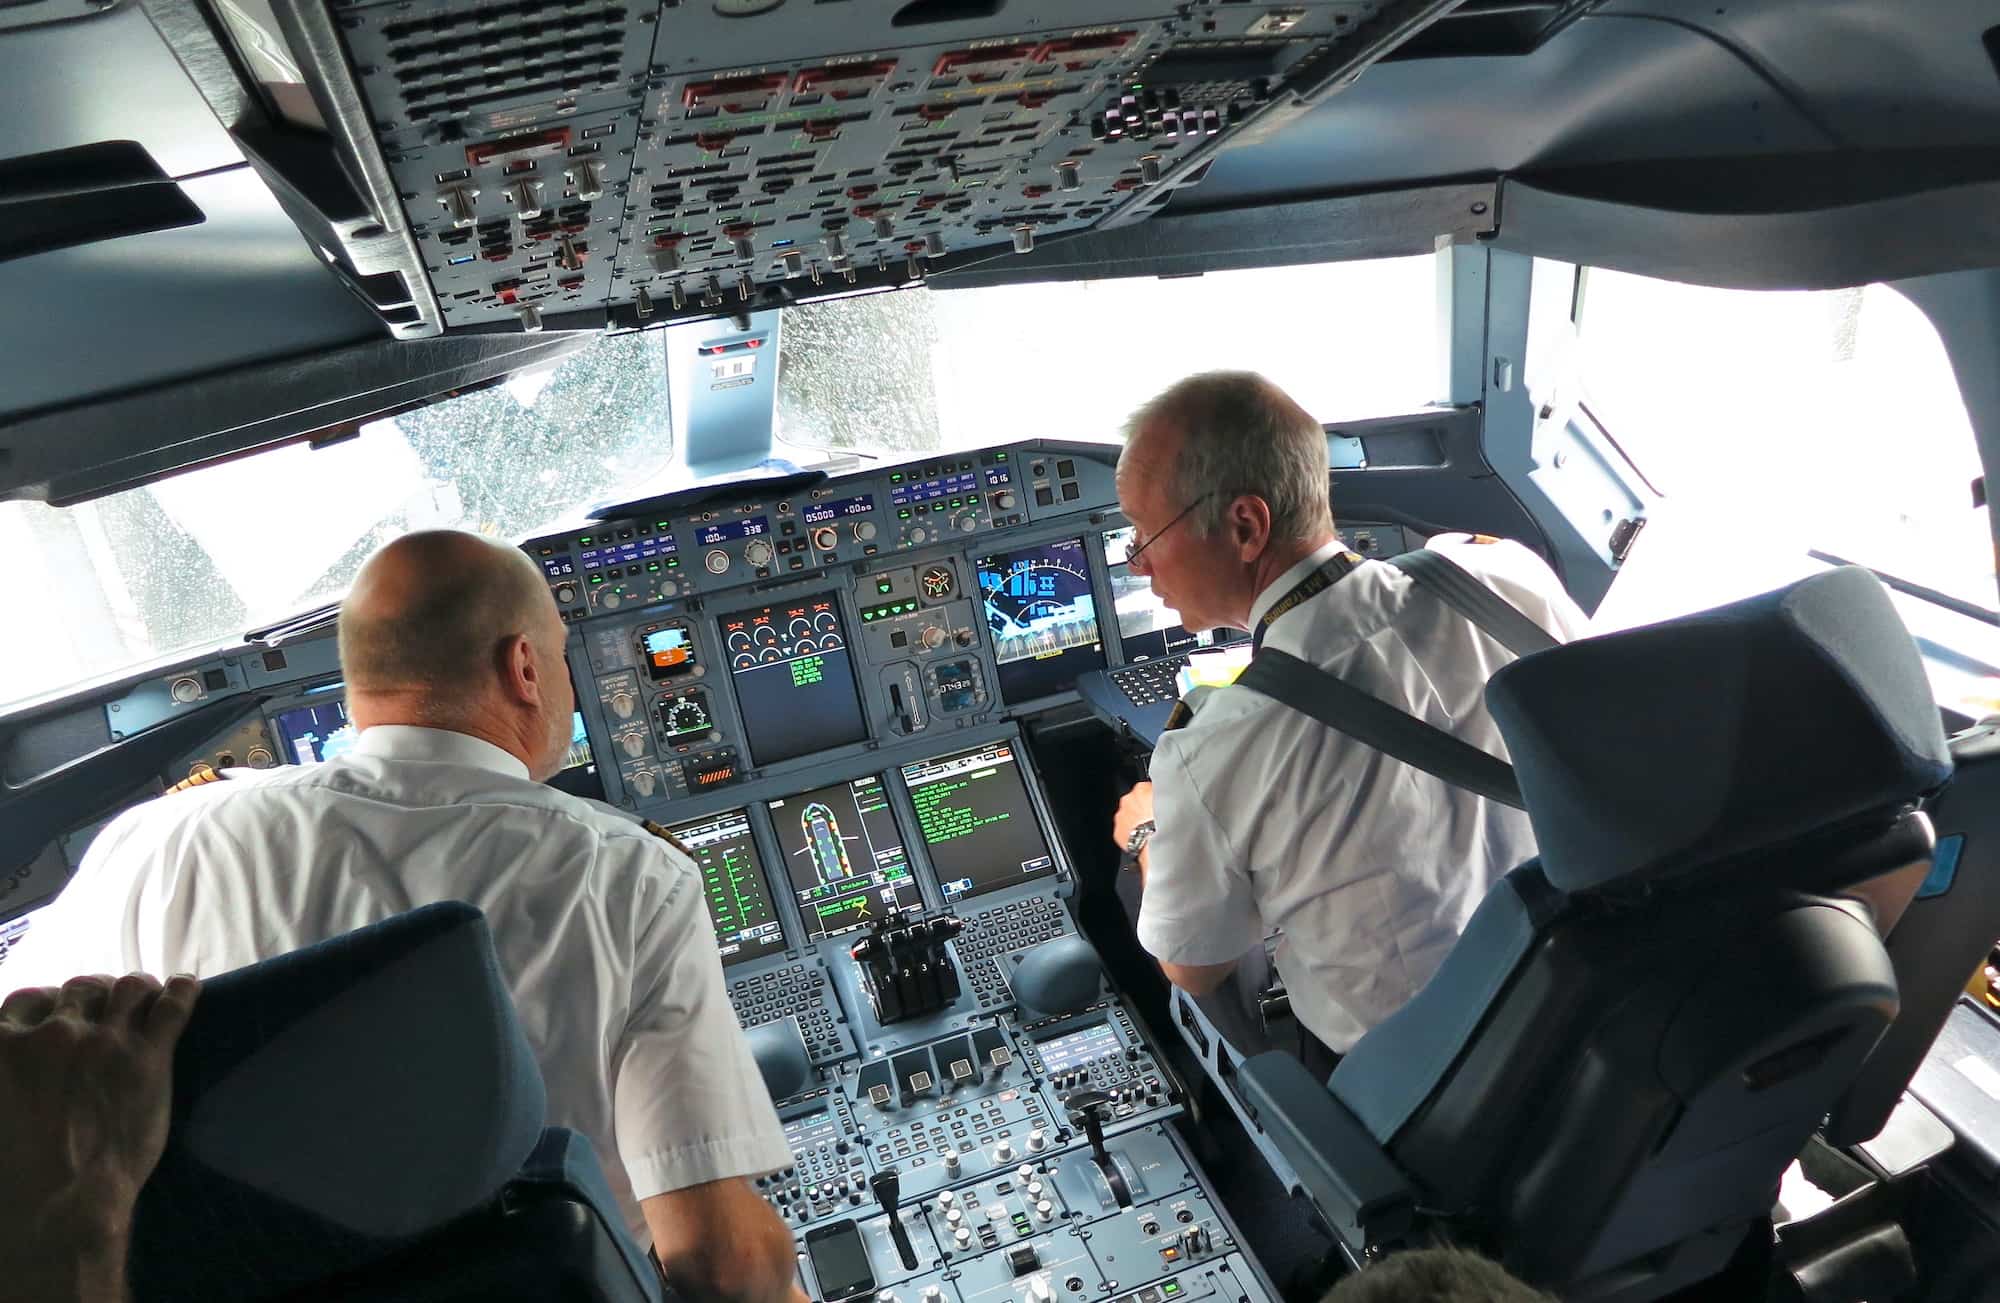 The cockpit of an Airbus A380. Photo by [Steve Jurvetson](https://secure.flickr.com/photos/jurvetson/7510460530/in/photostream), [CC BY 2.0](https://commons.wikimedia.org/w/index.php?curid=23313866)